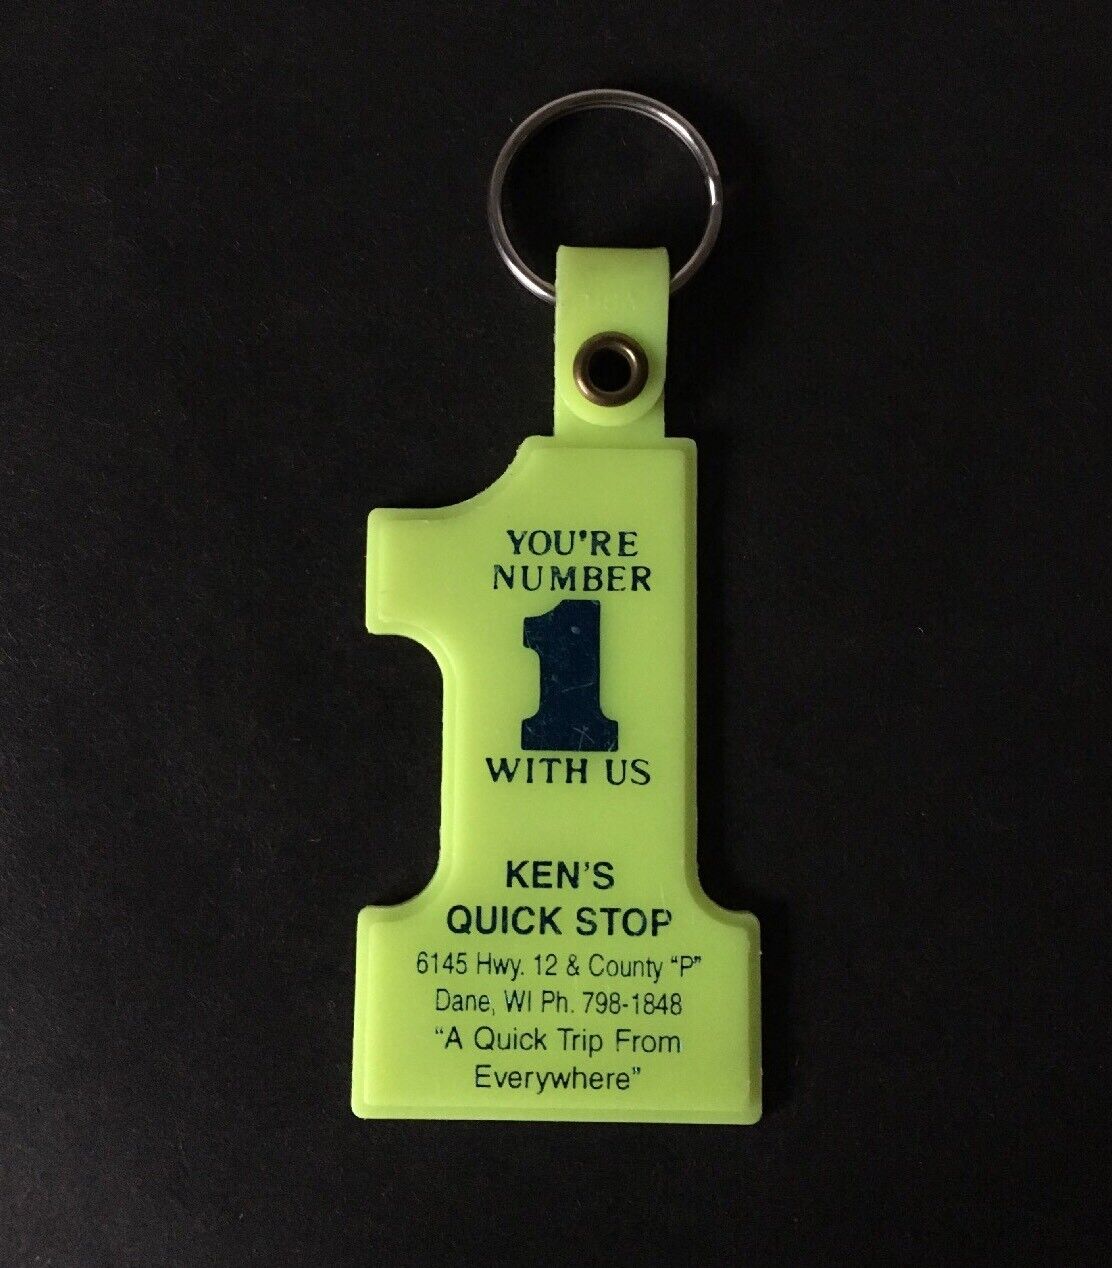 Vintage Keychain KEN’S QUICK STOP Key Ring #1 Fob DANE, WI. Made In USA